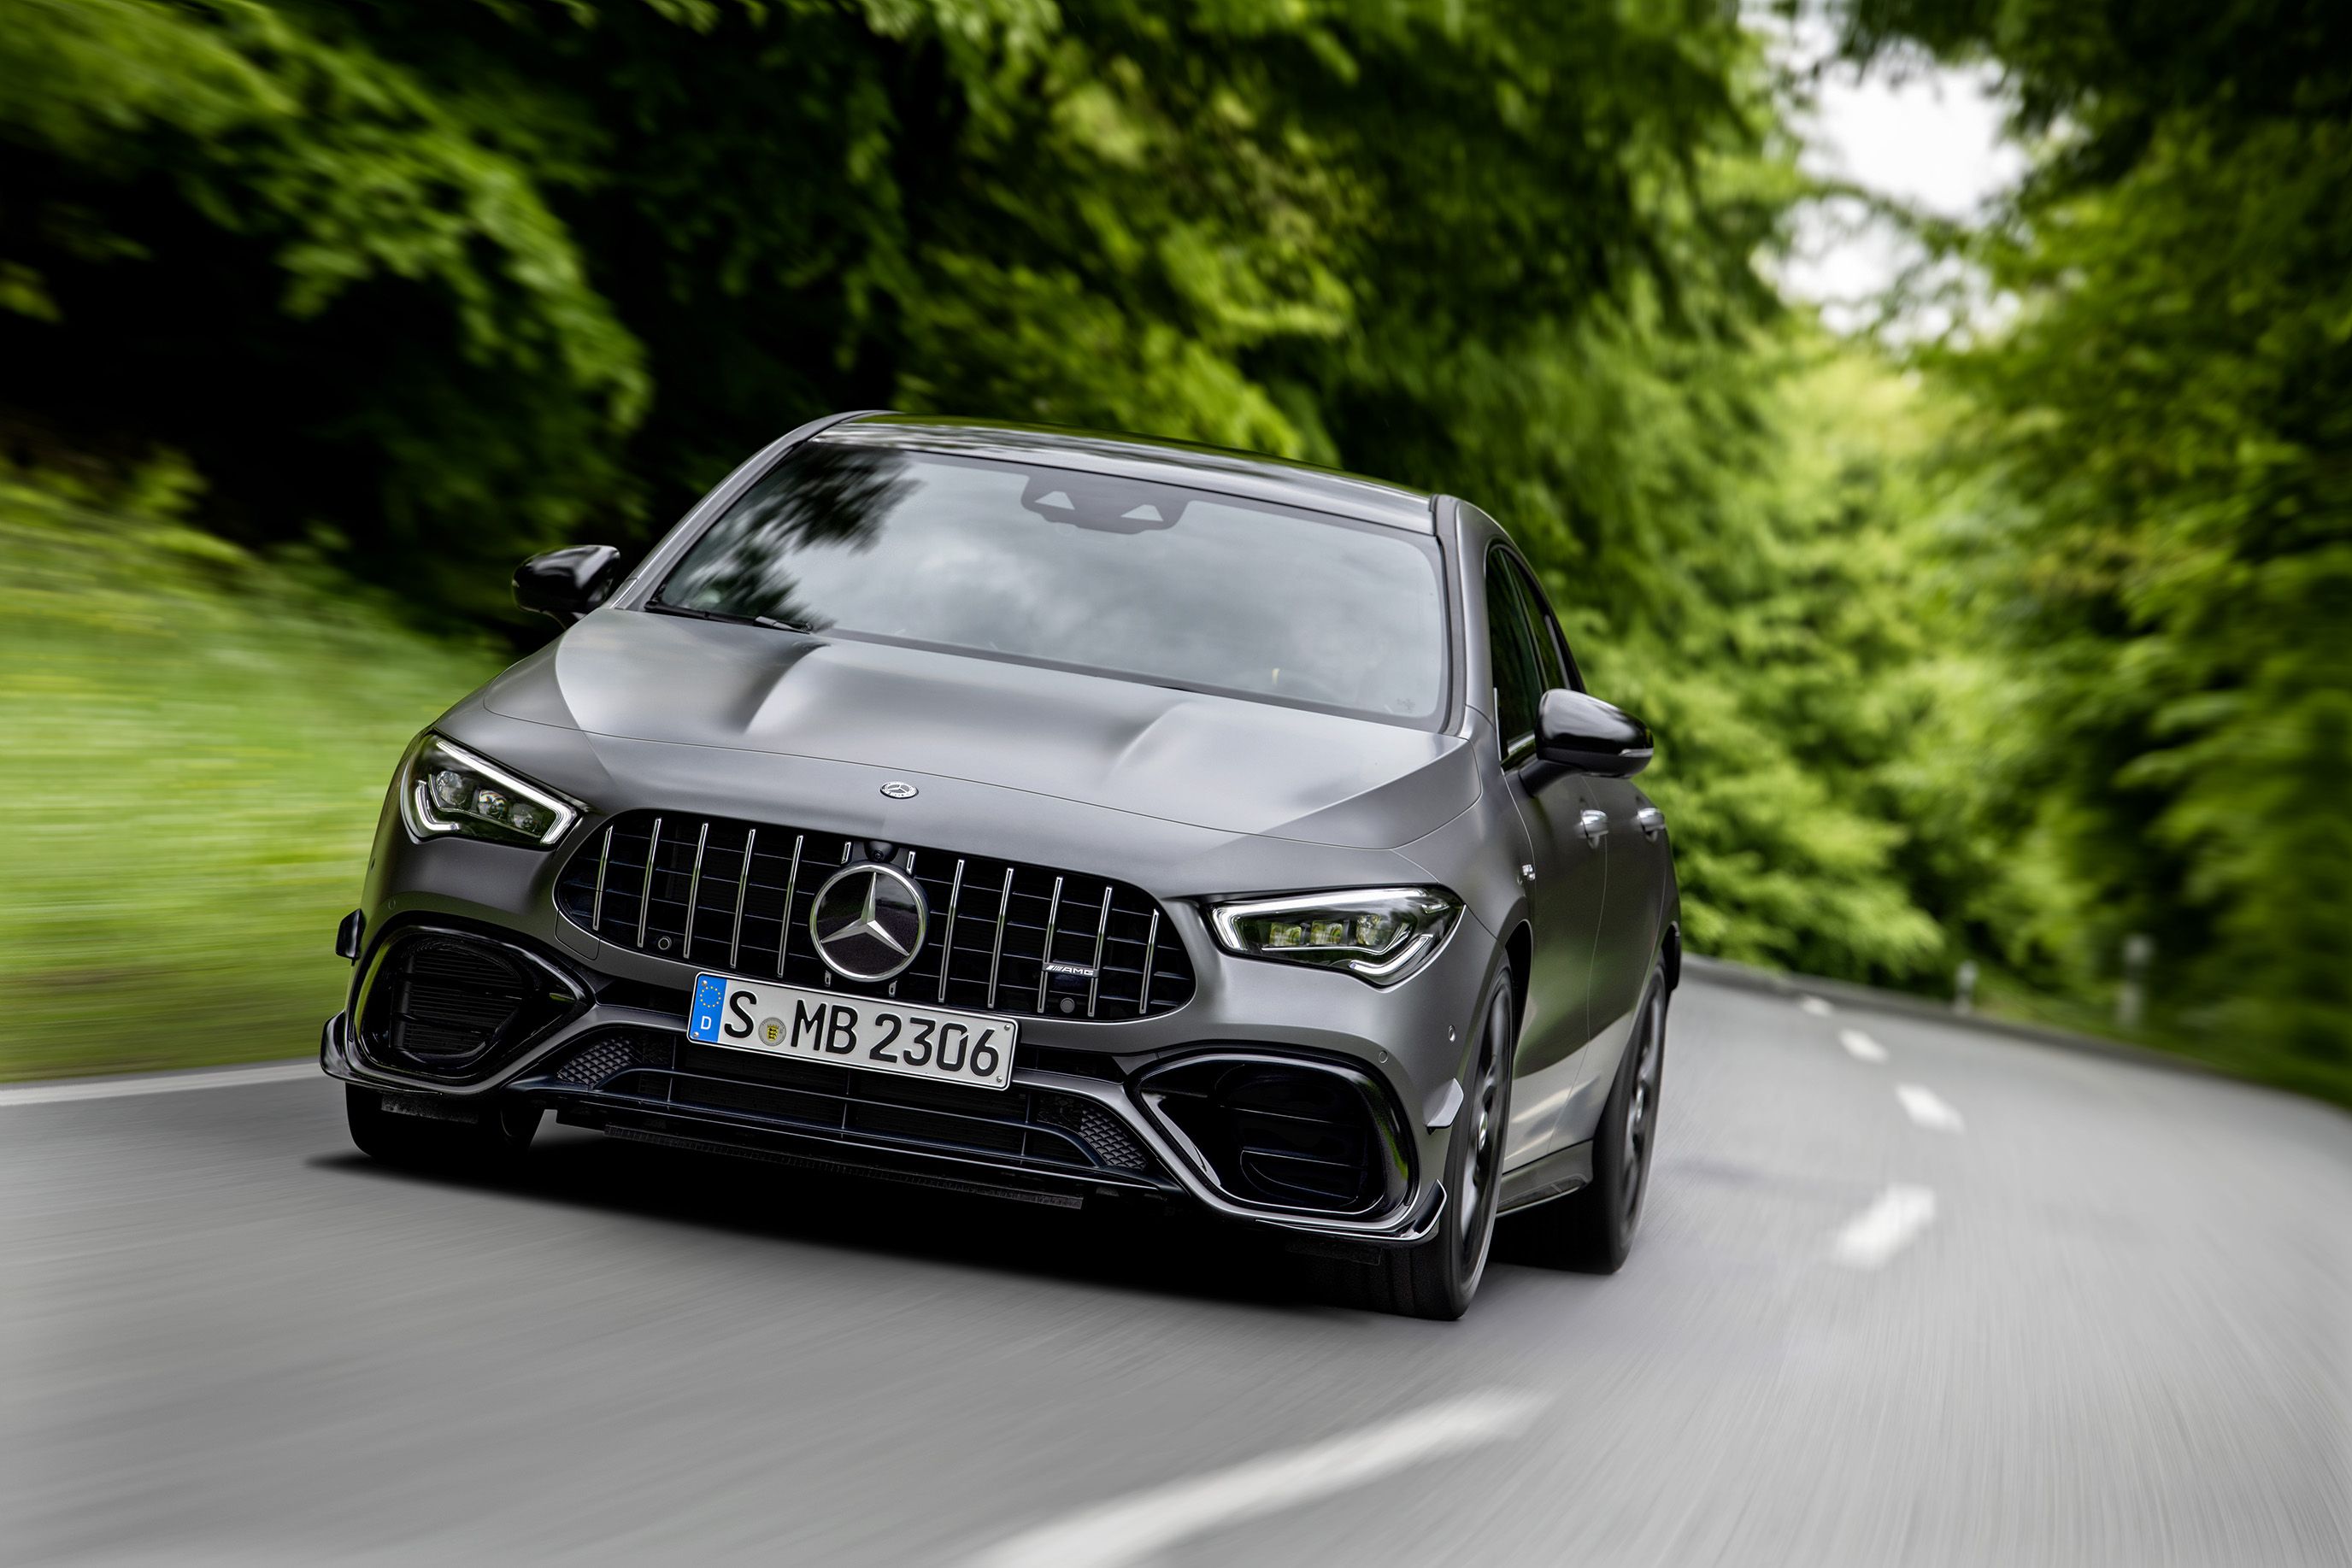 2020 Mercedes-AMG CLA 45 Revealed With Pictures, HP, and Specs